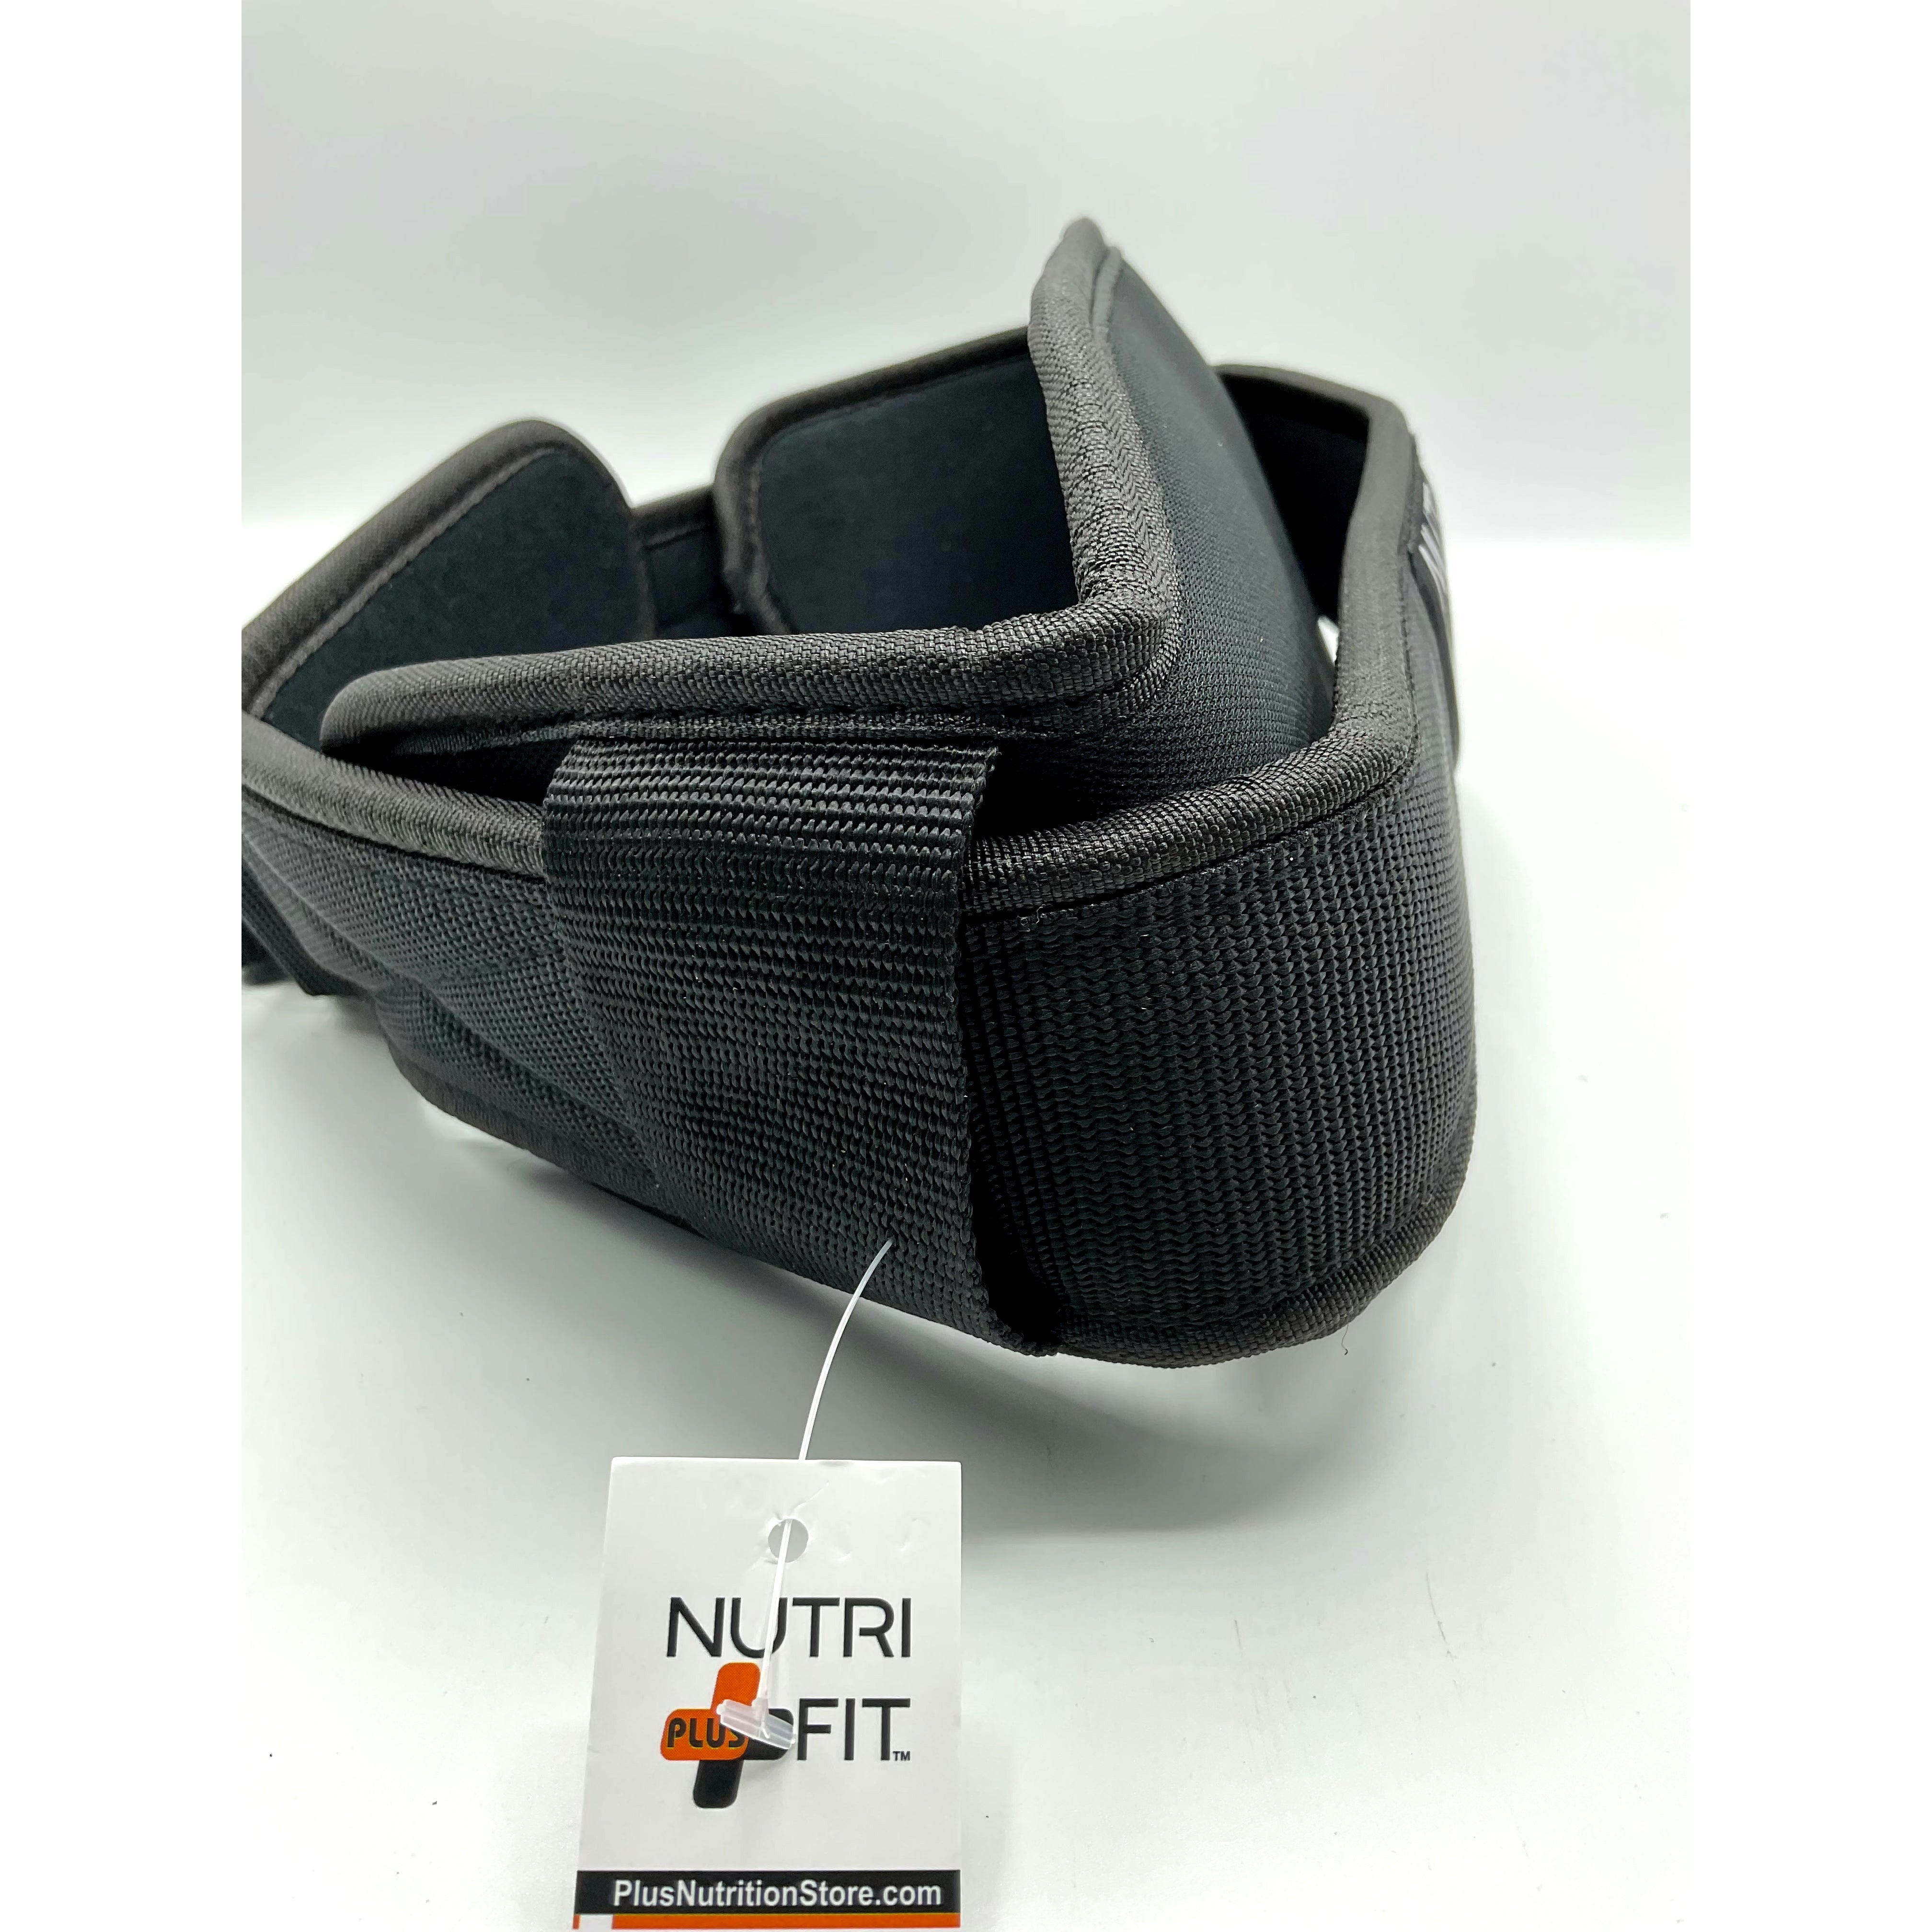 Nutri Fit Plus Premium Weightlifting Belt for Fitness, Weightlifting and Olympic Lifting - Support for Men and Women - Deadlift Professional Training Belt- Easy Locking